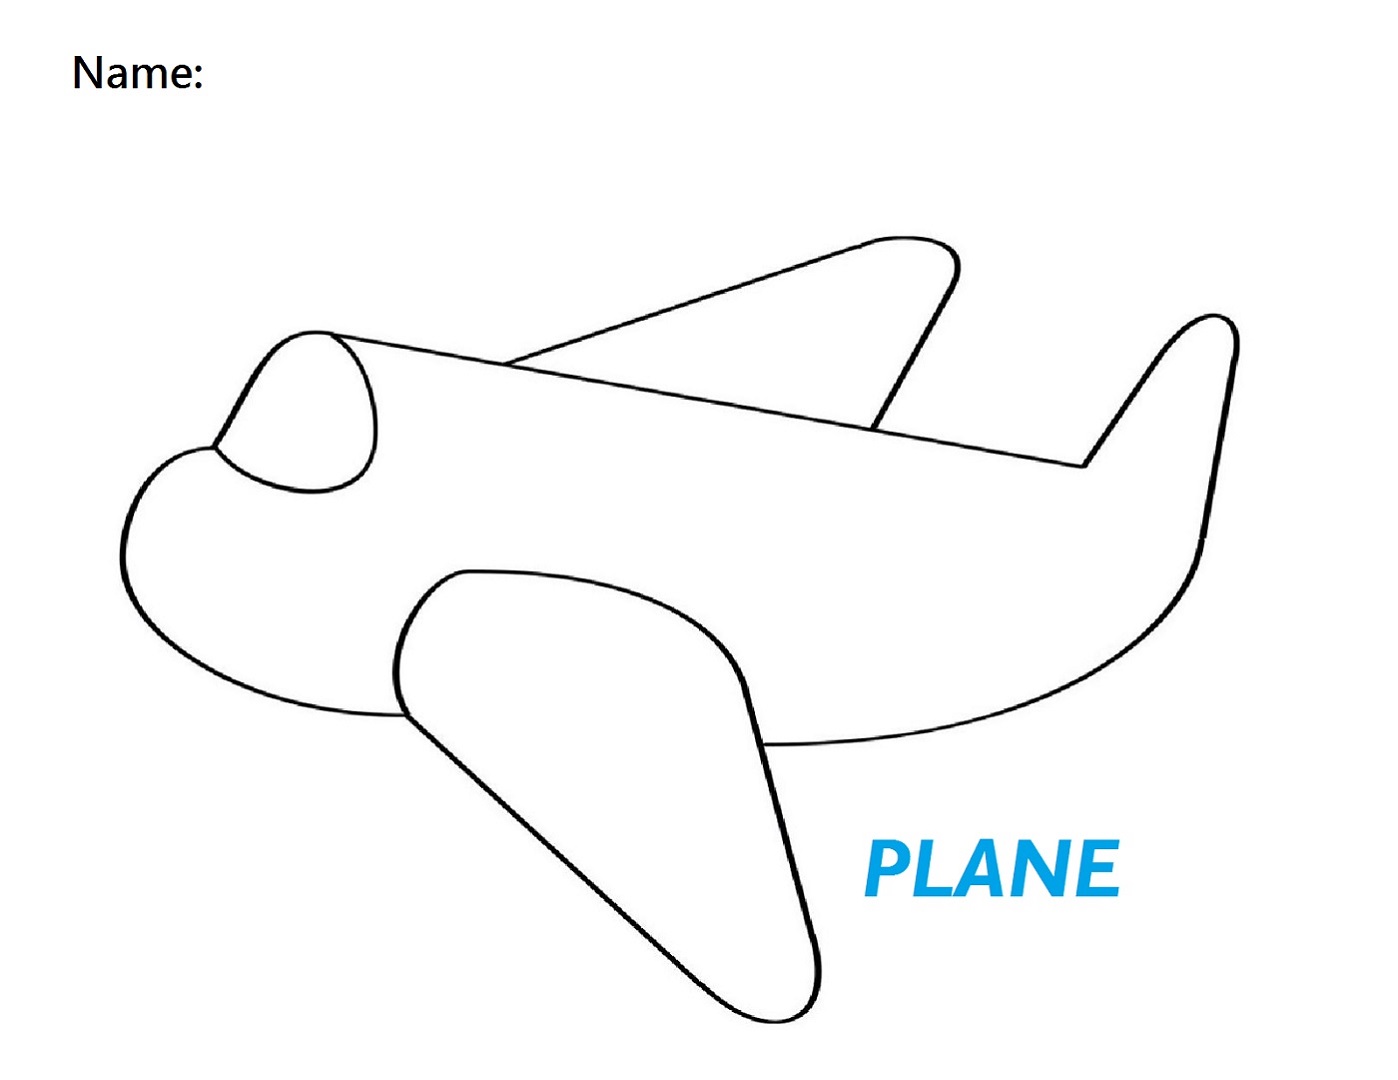 Coloring Sheets For 3 Year Olds Plane